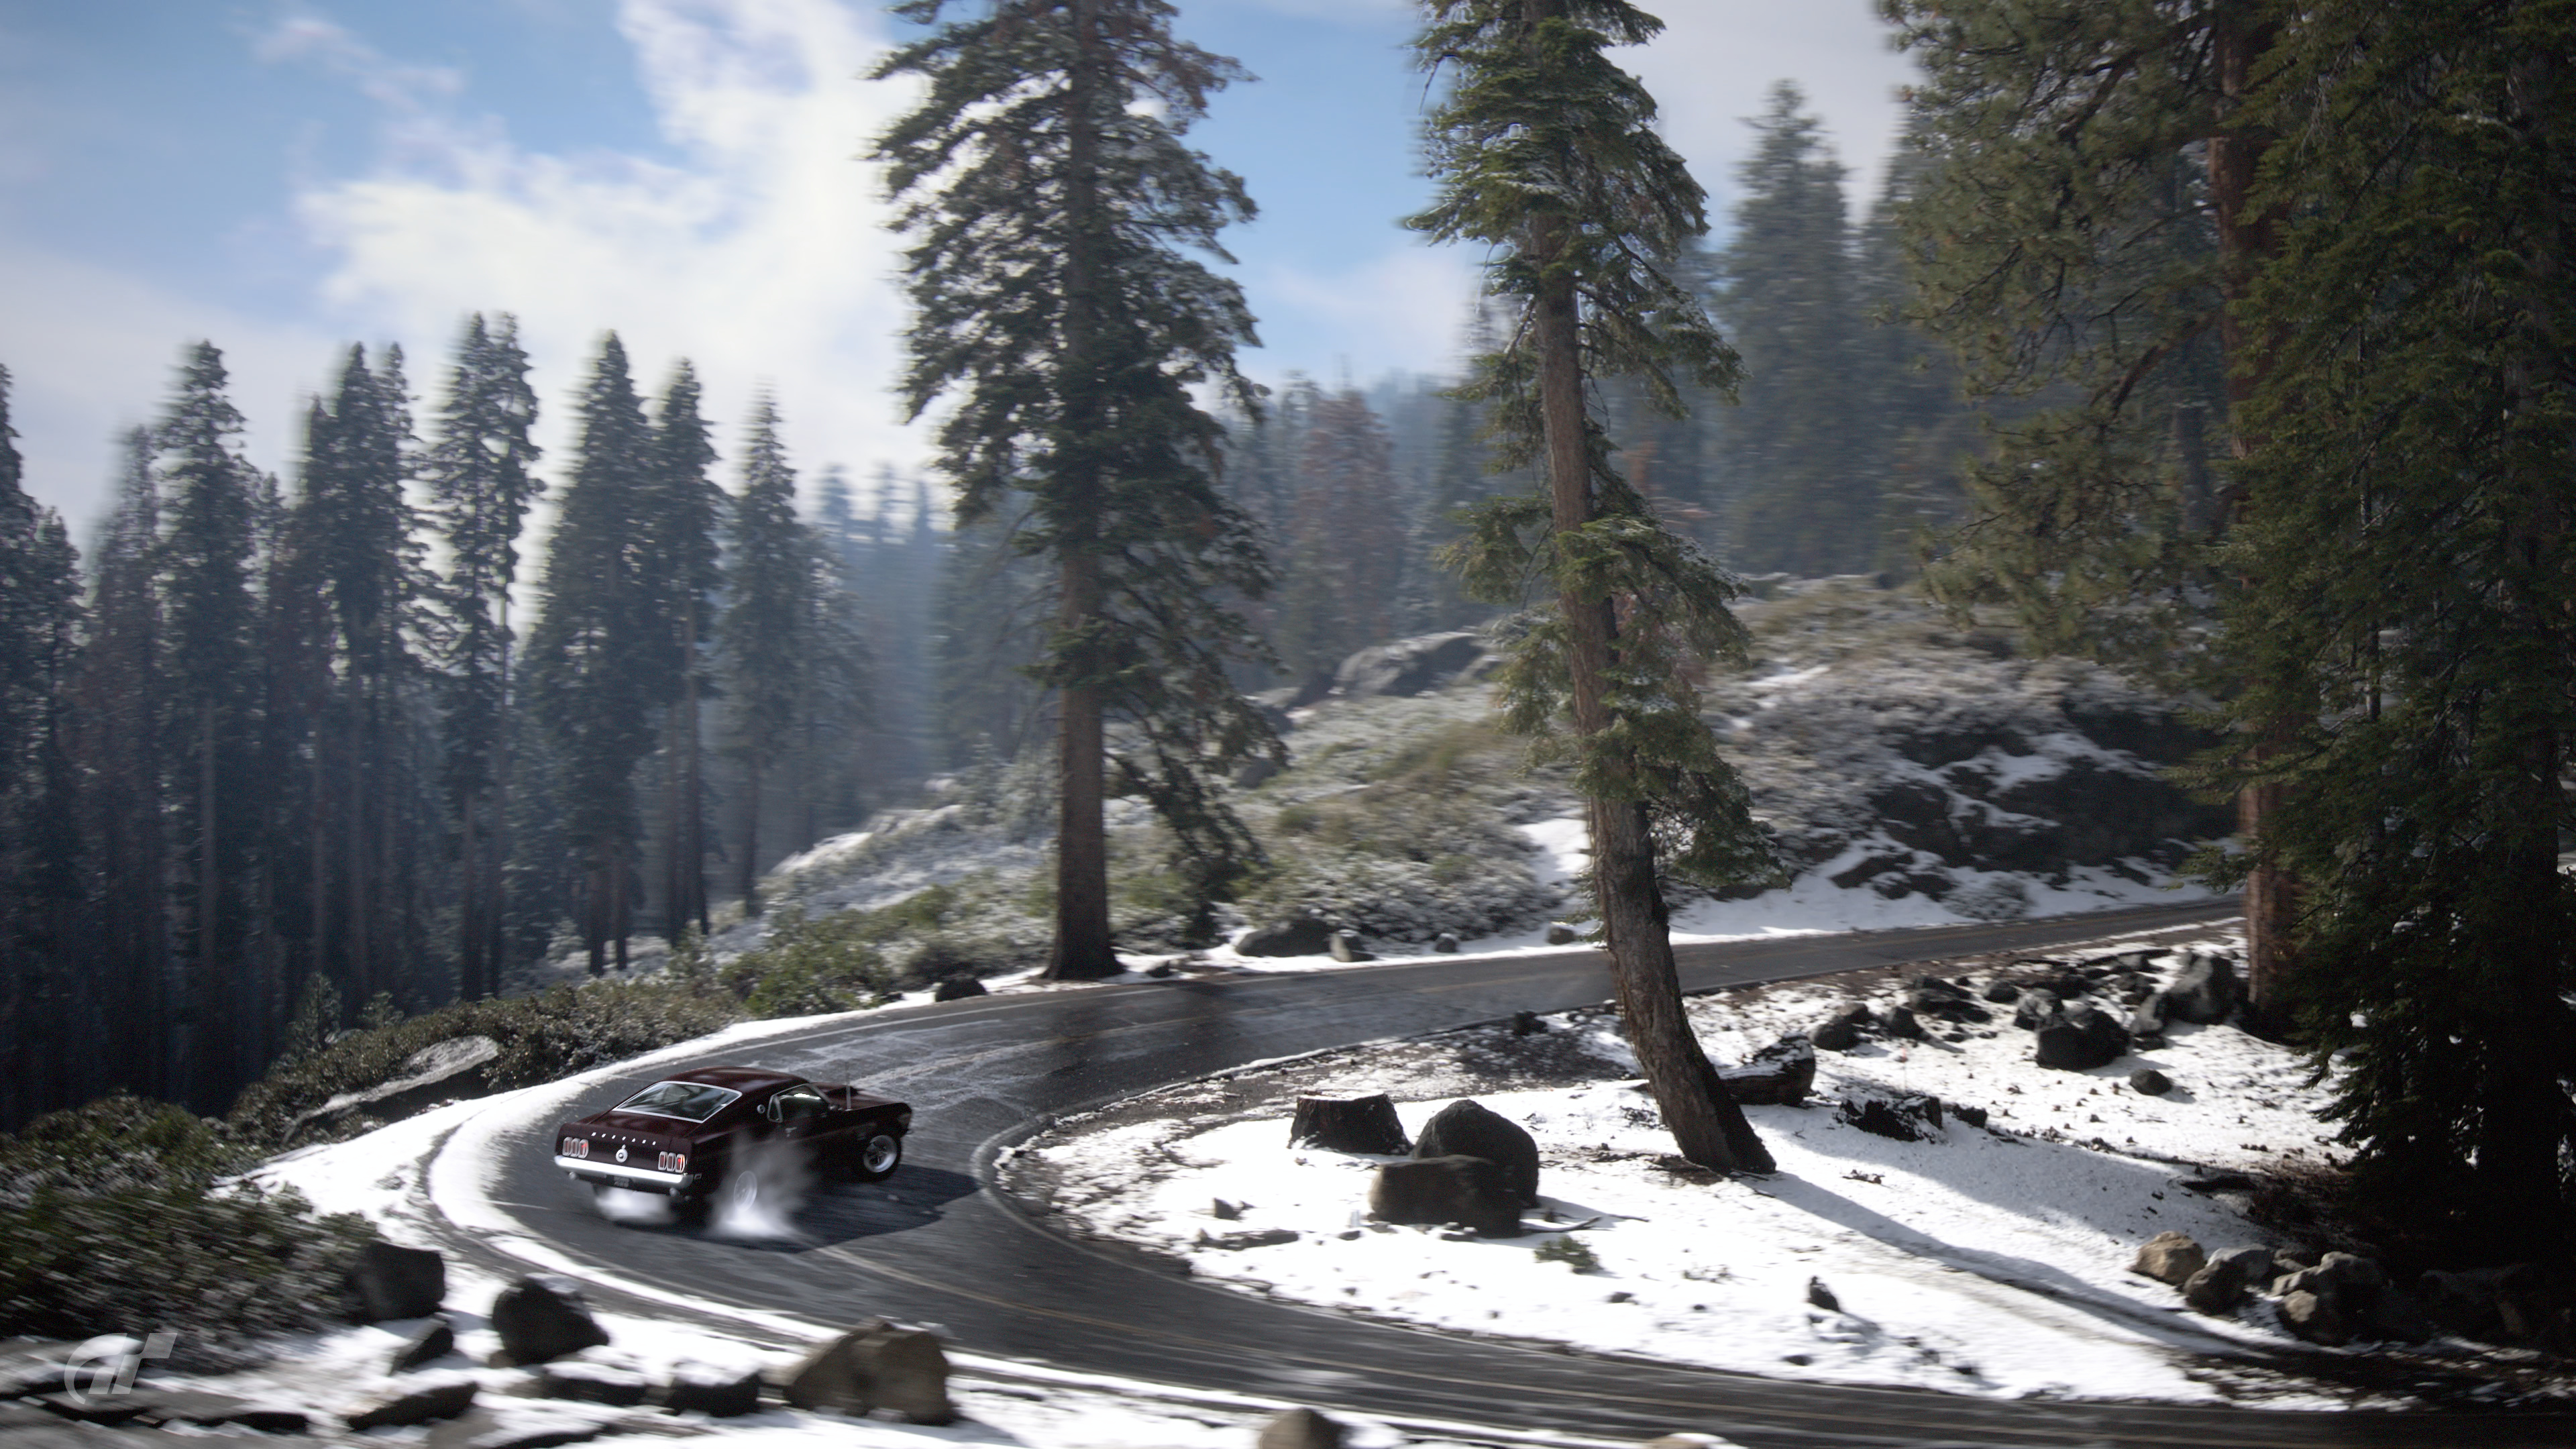 General 3840x2160 nature car vehicle drift forest video games Gran Turismo 7 Ford Mustang Yosemite National Park snow trees road clouds sky digital art